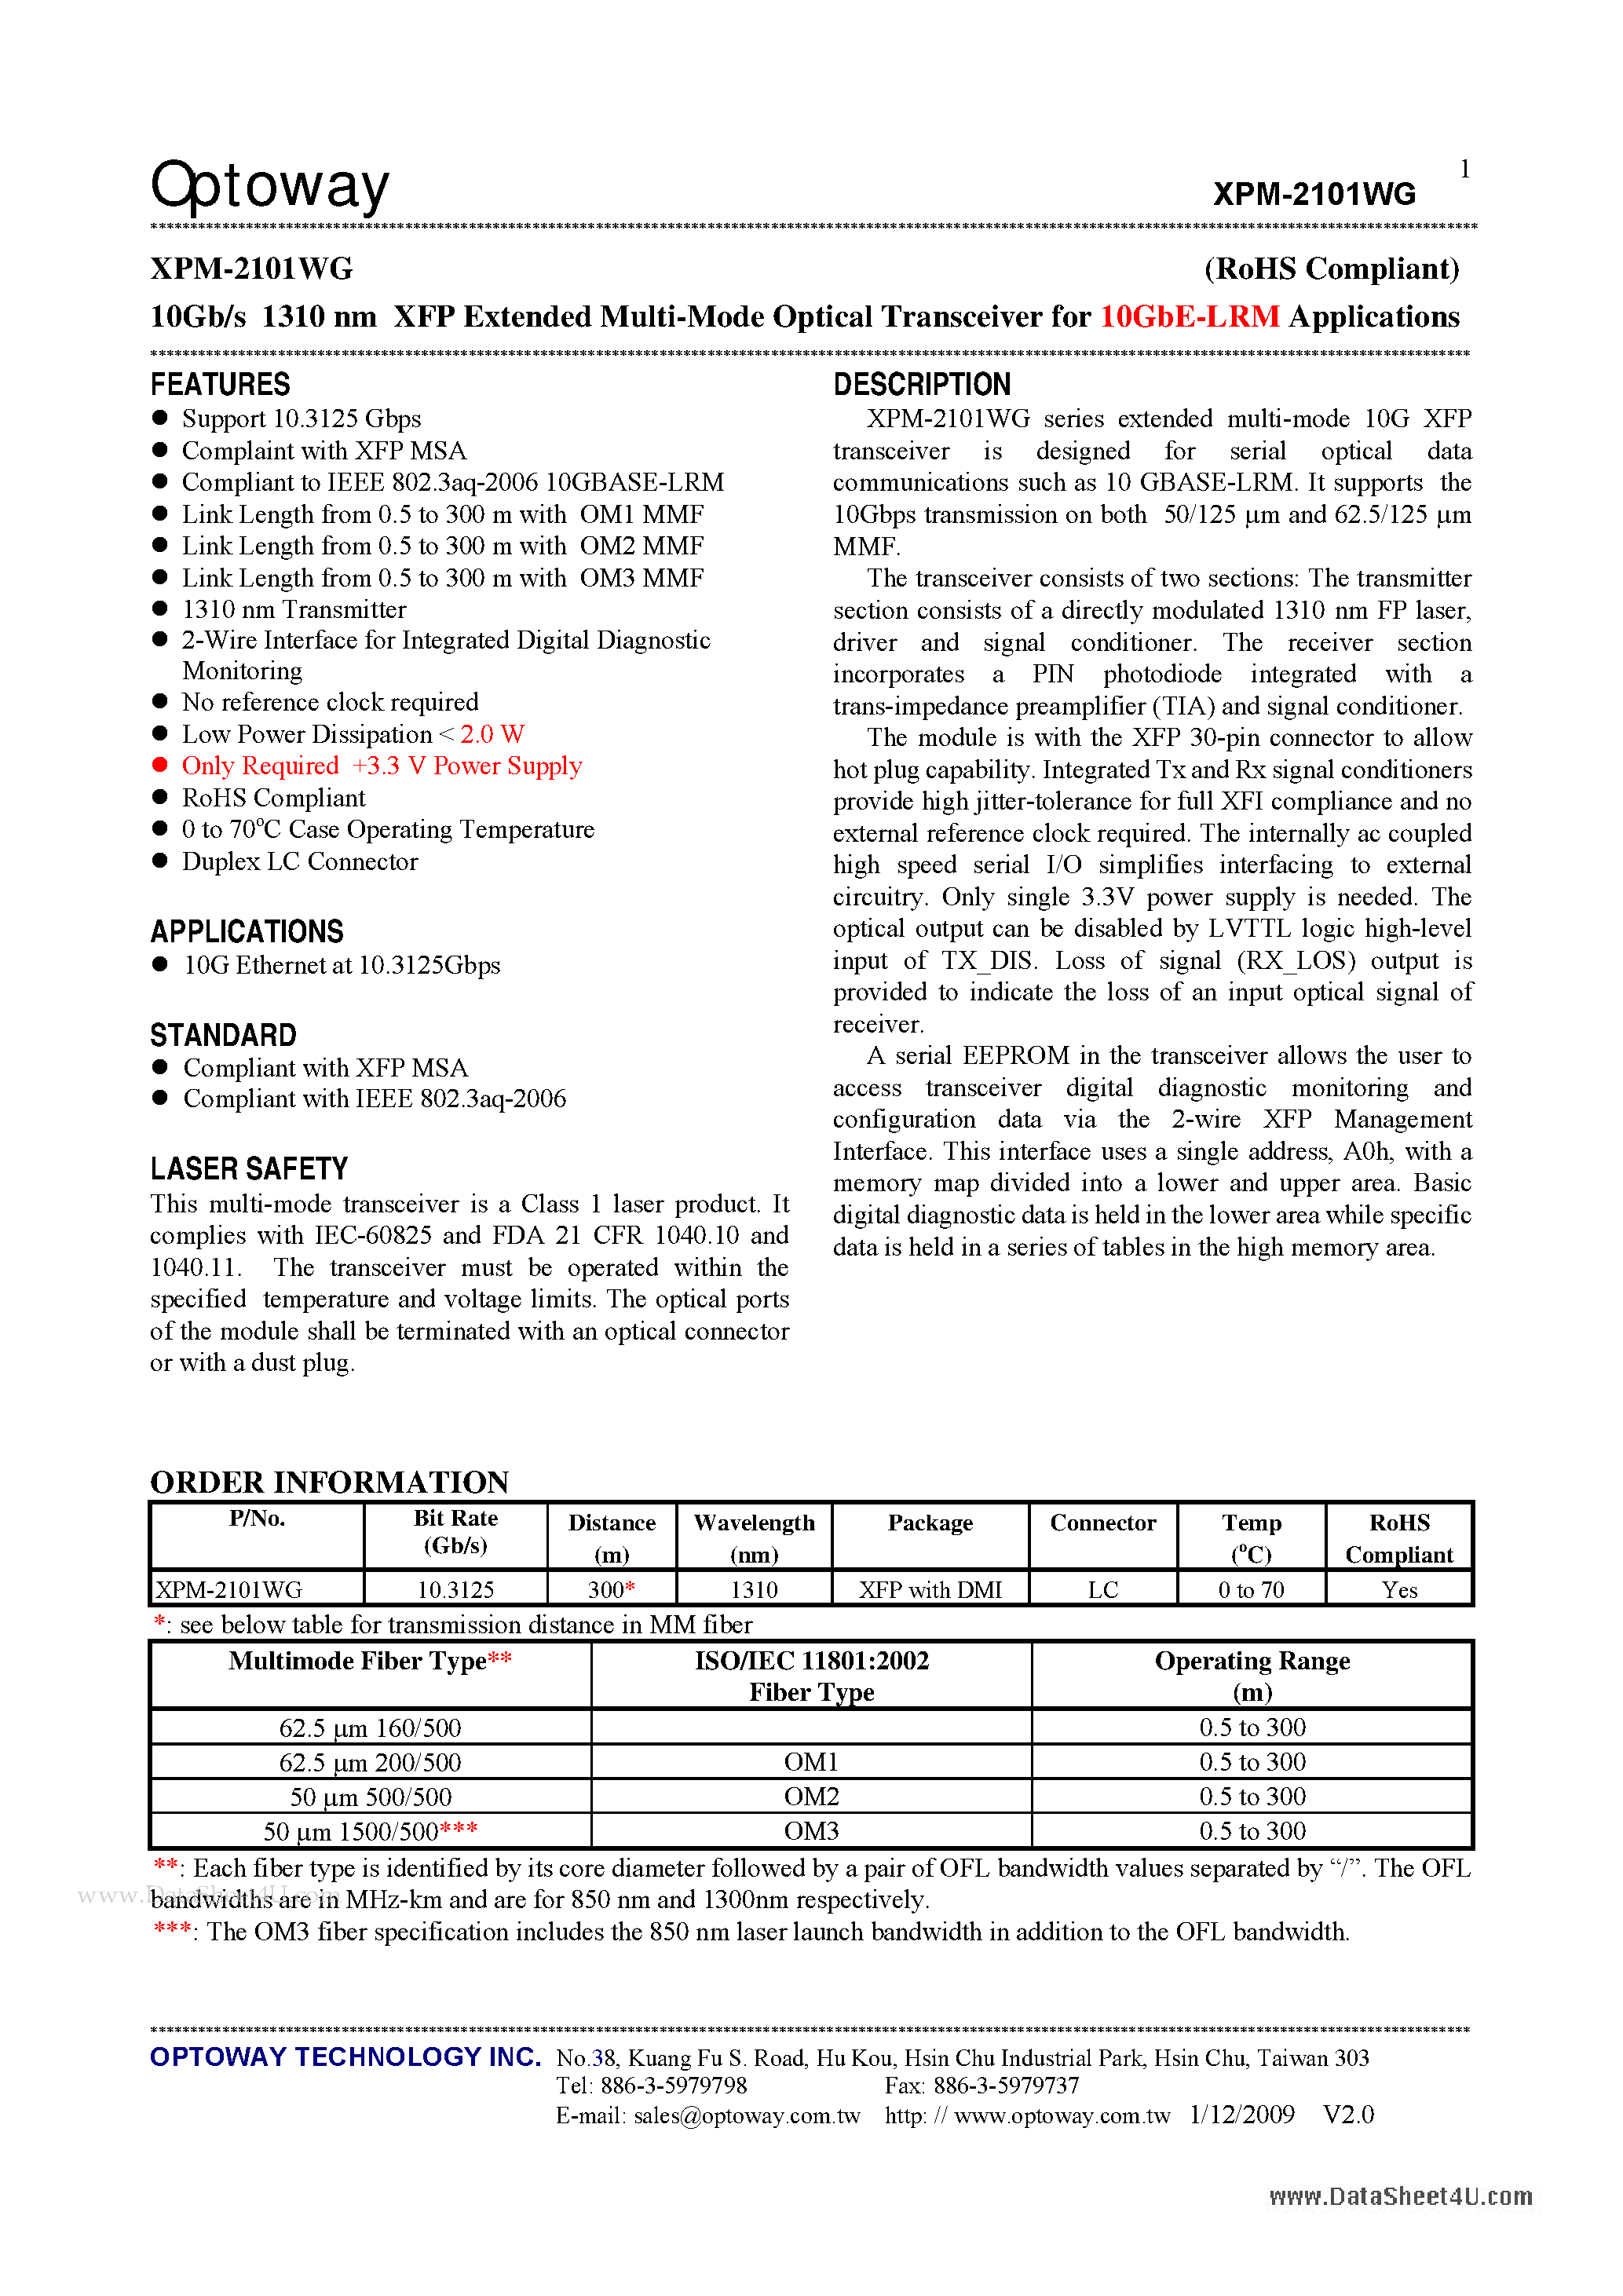 Datasheet XPM-2101WG - 10Gb/s 1310 nm XFP Extended Multi-Mode Optical Transceiver page 1